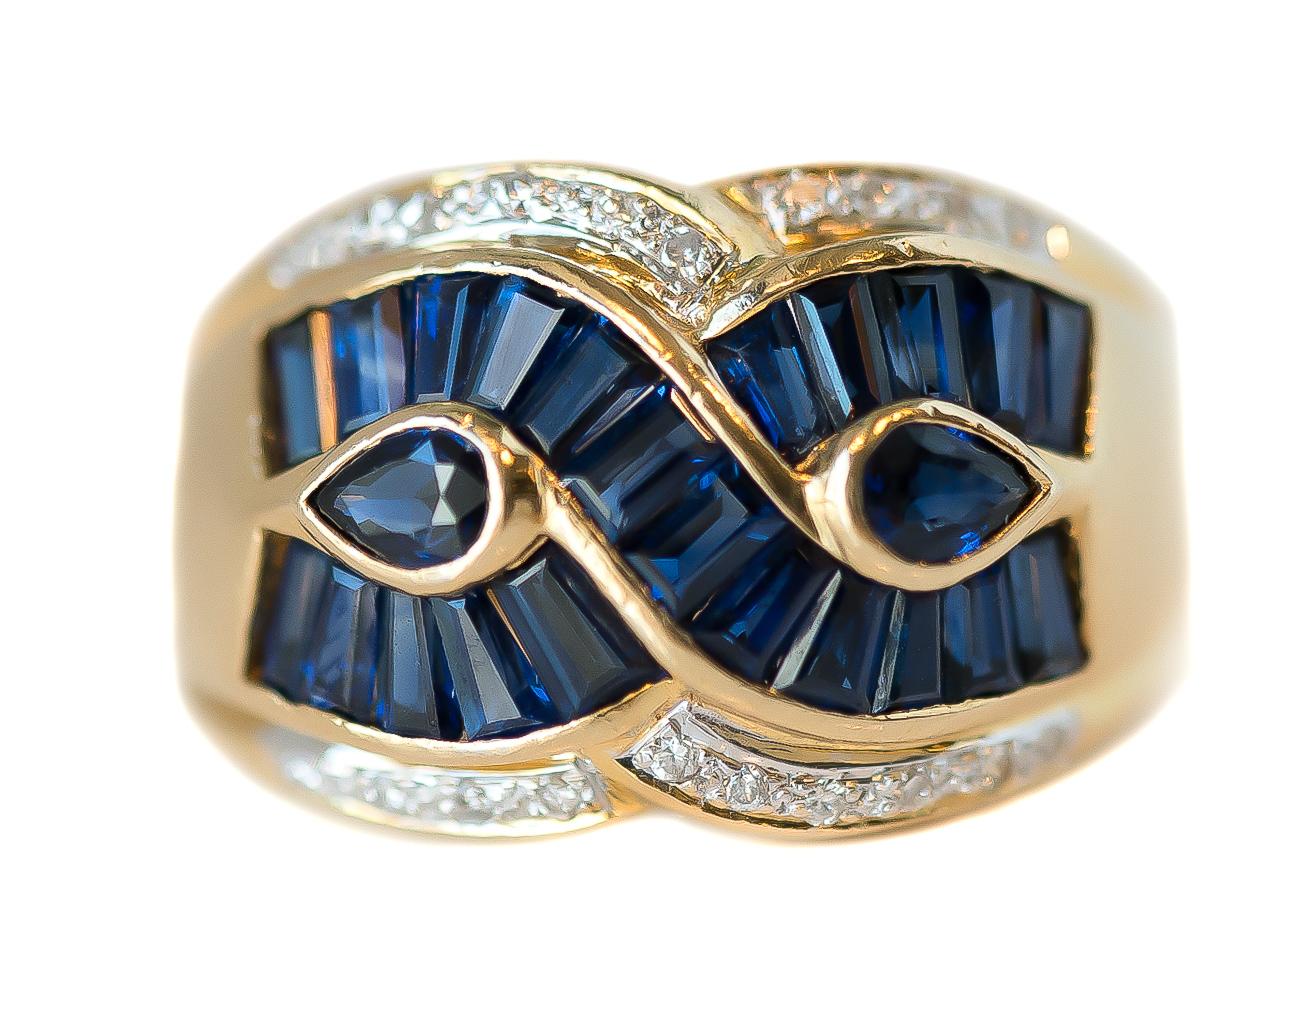 1950s 2 Carat Blue Sapphire, Diamond and 18 Karat Yellow Gold Cocktail Ring For Sale 1